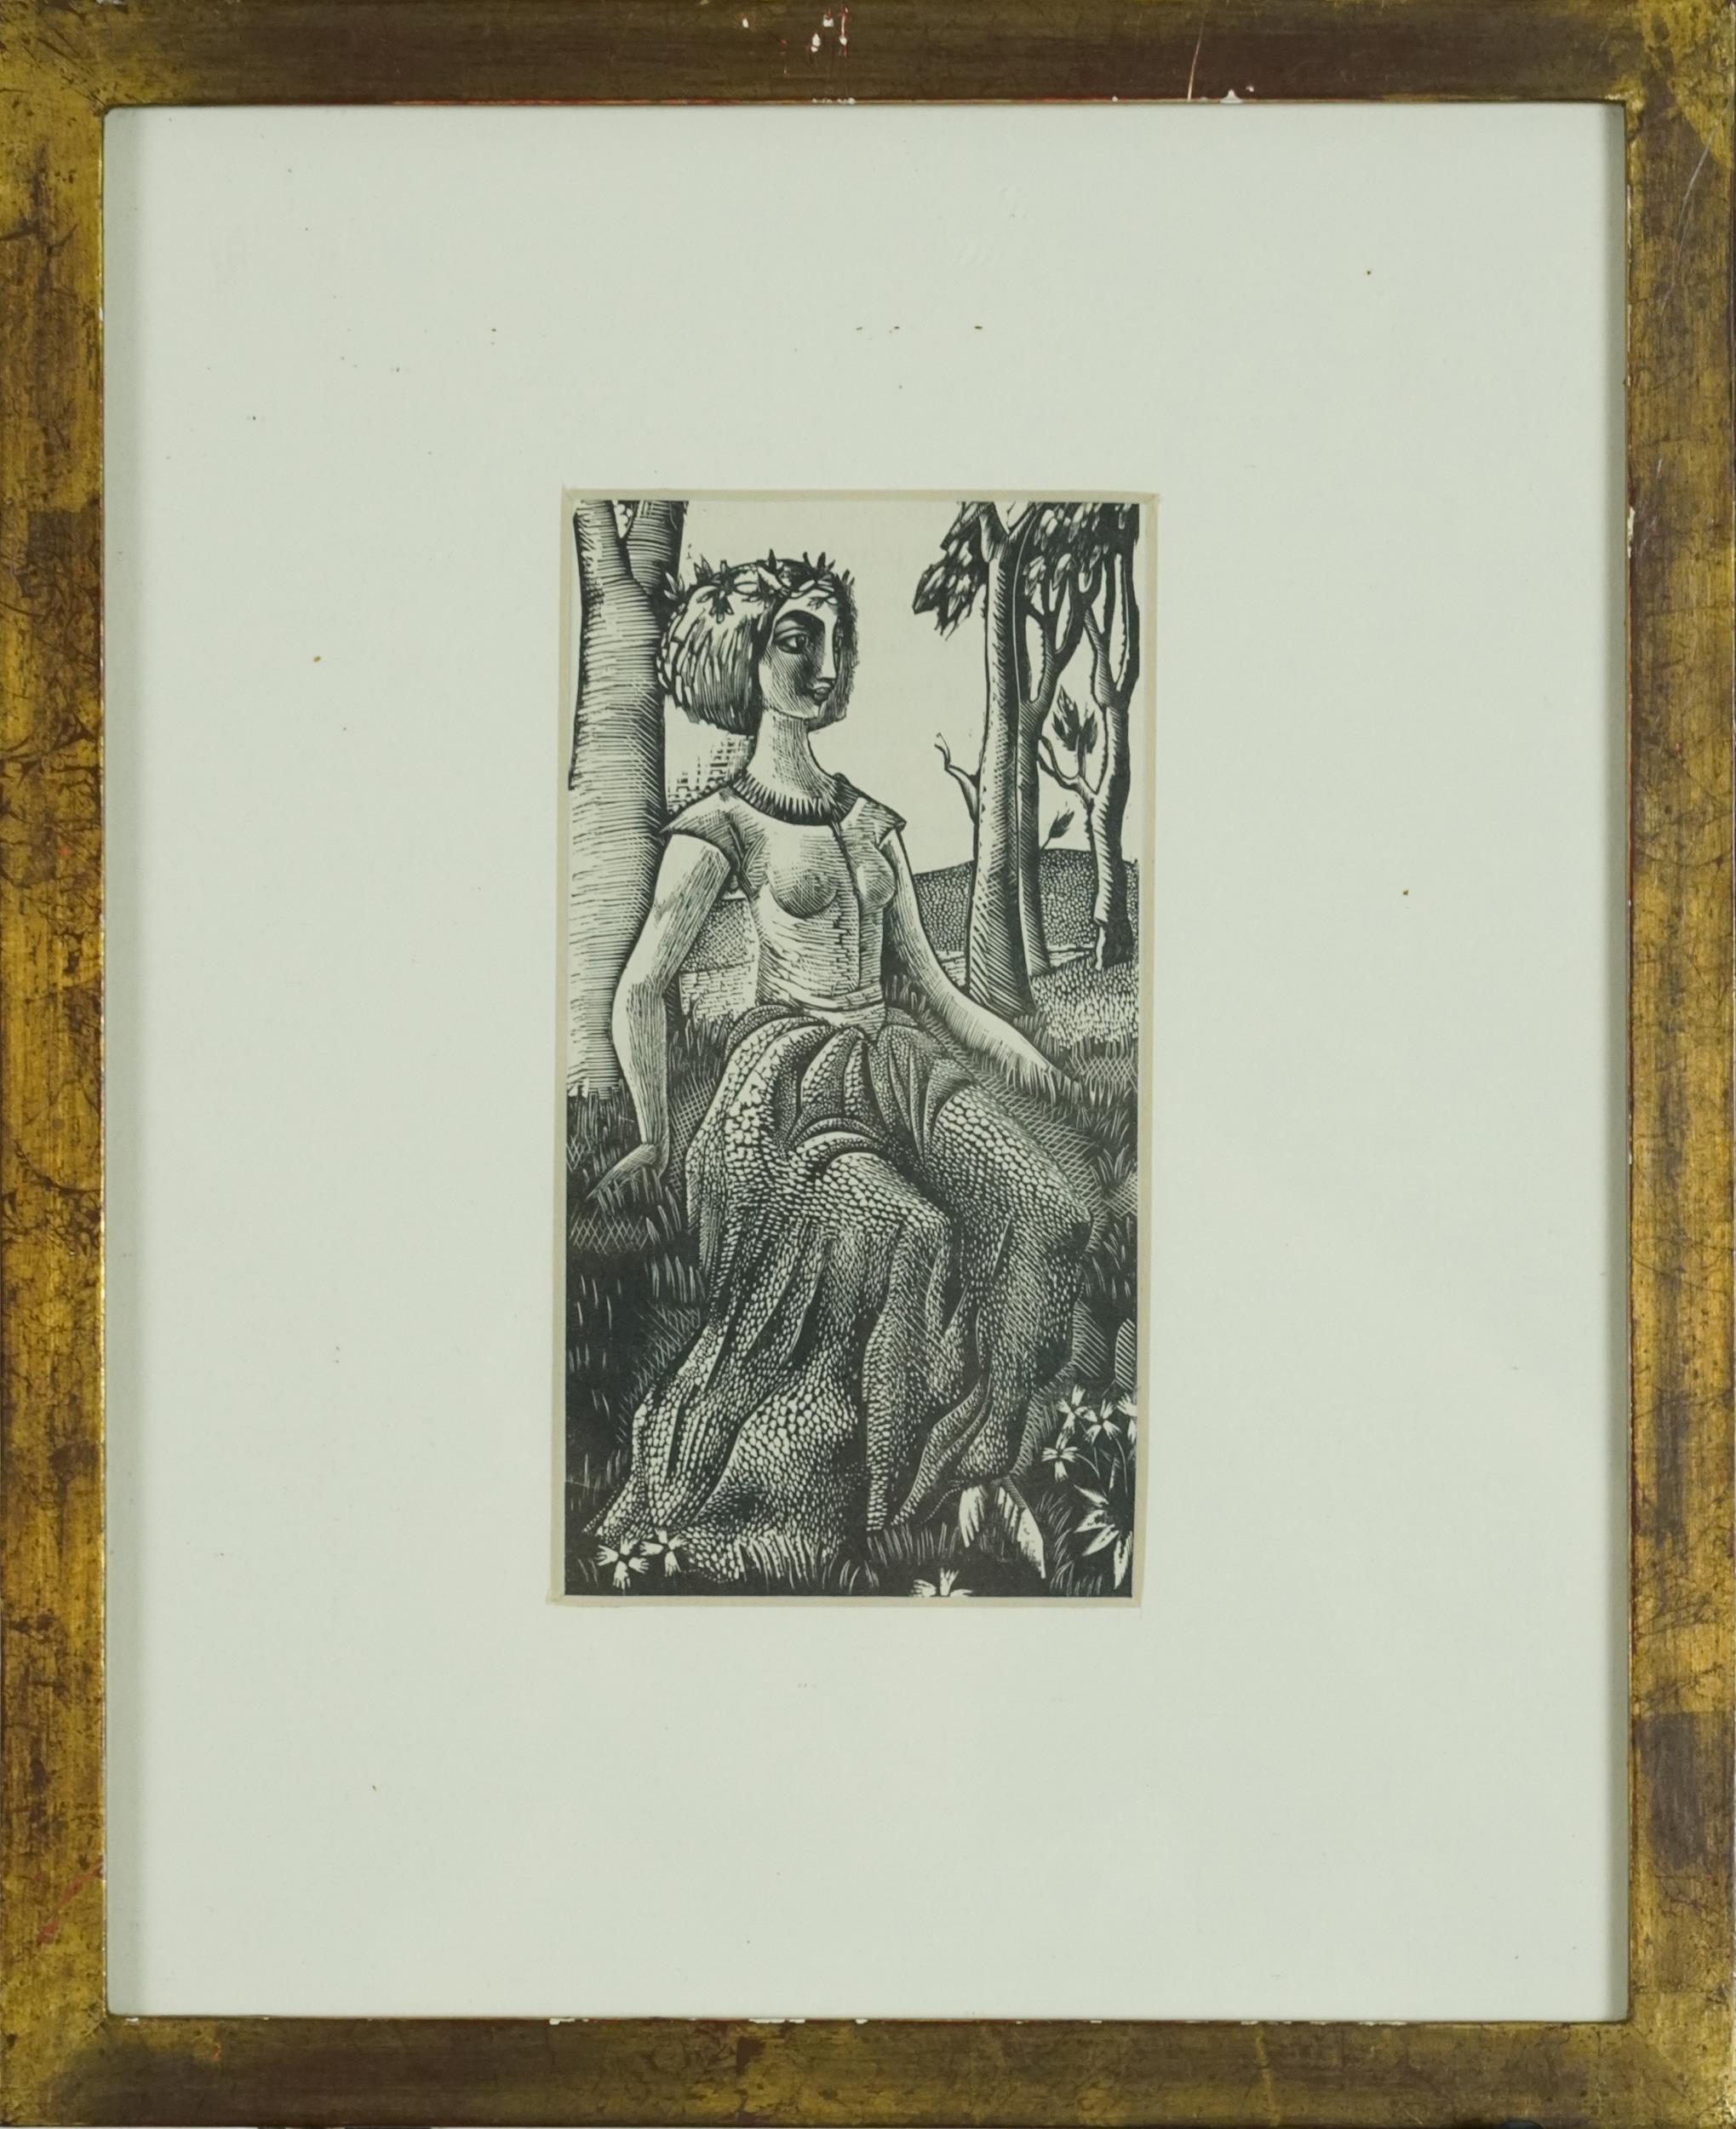 Eric Ravilious - Proserpina, wood engraving inscribed The Woodcut: An Annual, Flevron 1928 verso, - Image 2 of 4